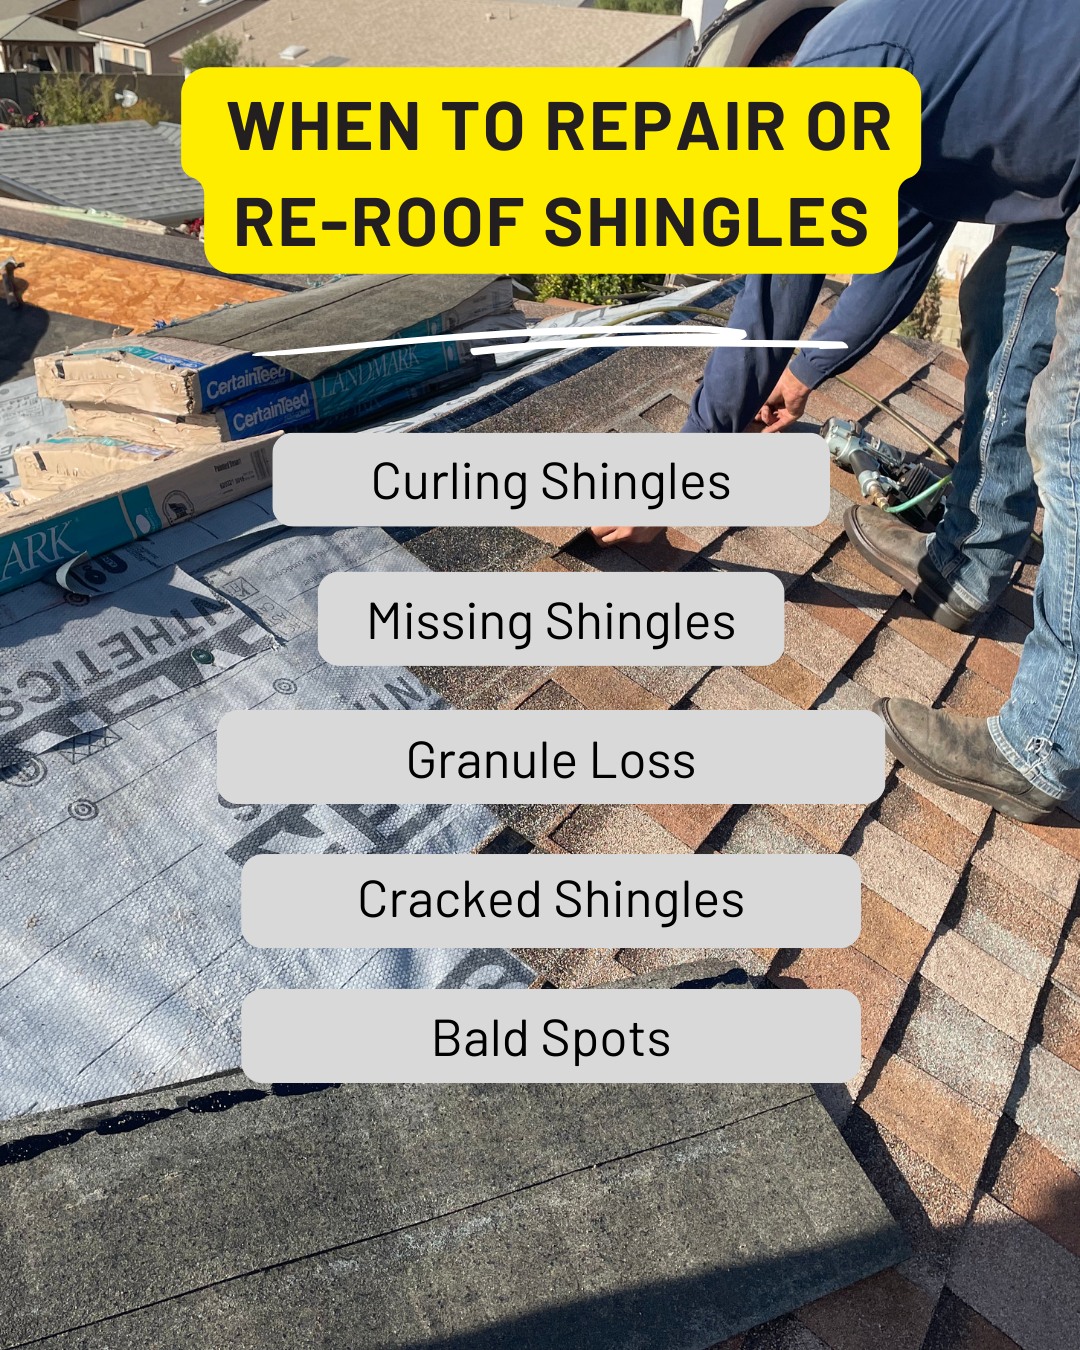 Do I Repair or Replace My Shingle Roof?